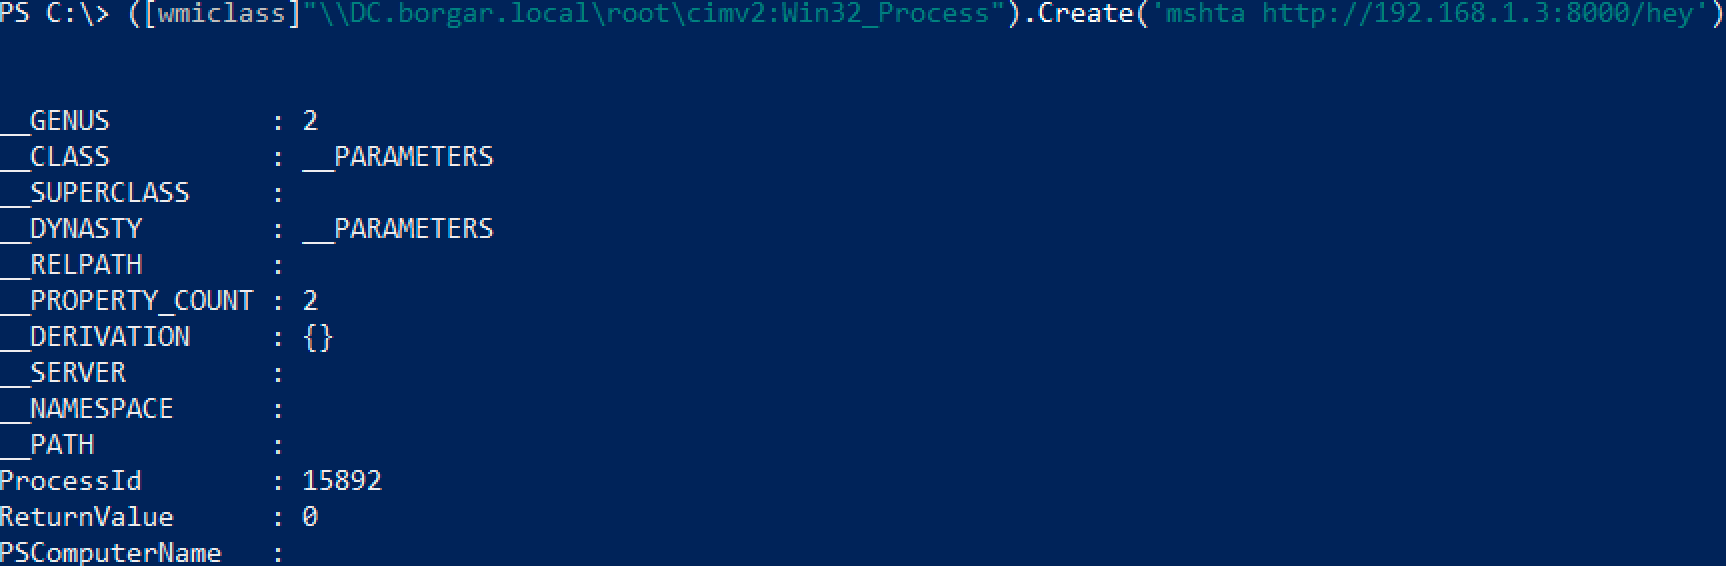 Creating a wmiclass object on the Domain Controller and creating a remote process